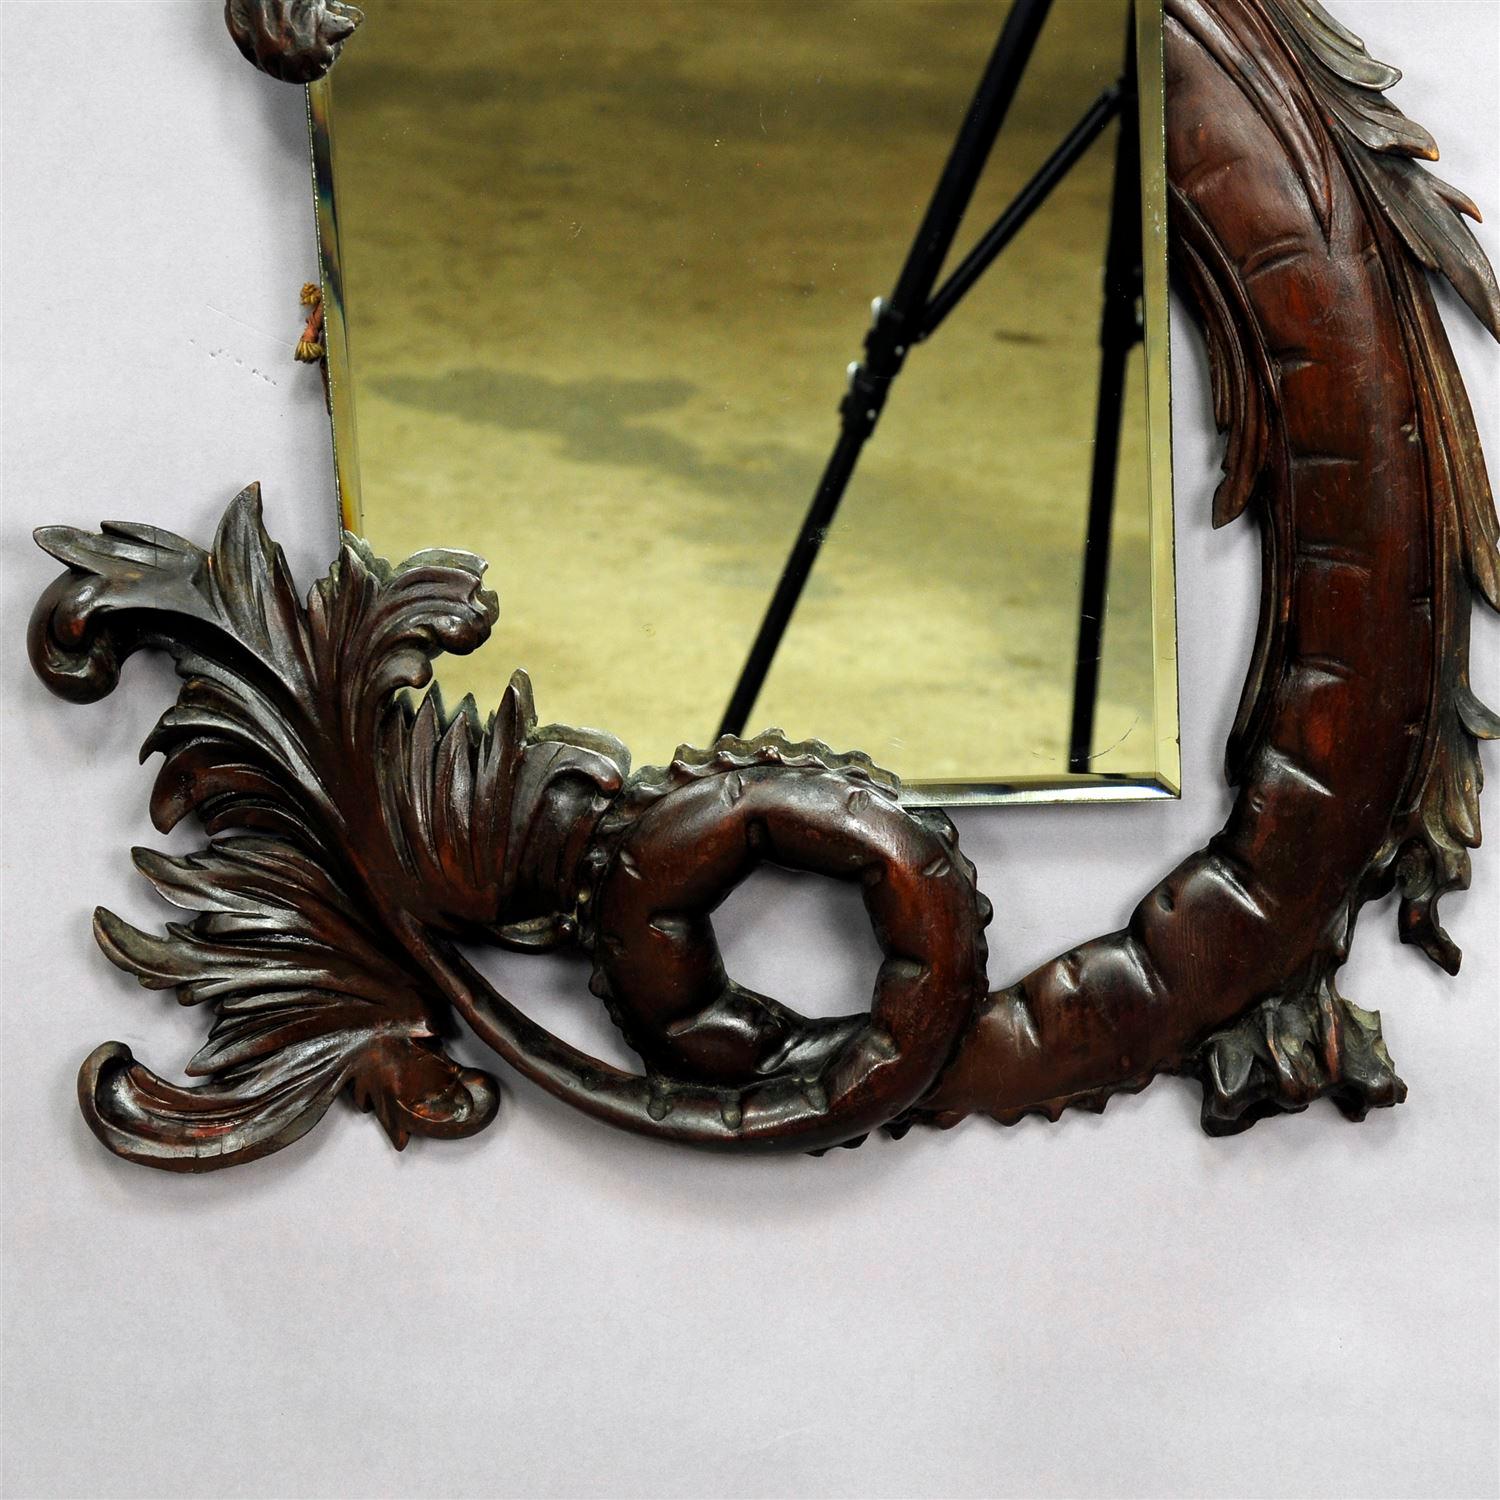 A decorative mystical wooden caved dragon mirror. Executed circa 1900, very good condition, original antique mirror glass.

Measures: Width mirror: 11.8' inches (30 cm)
Height mirror: 20.5' inches (52 cm)
Width overall: 33.86